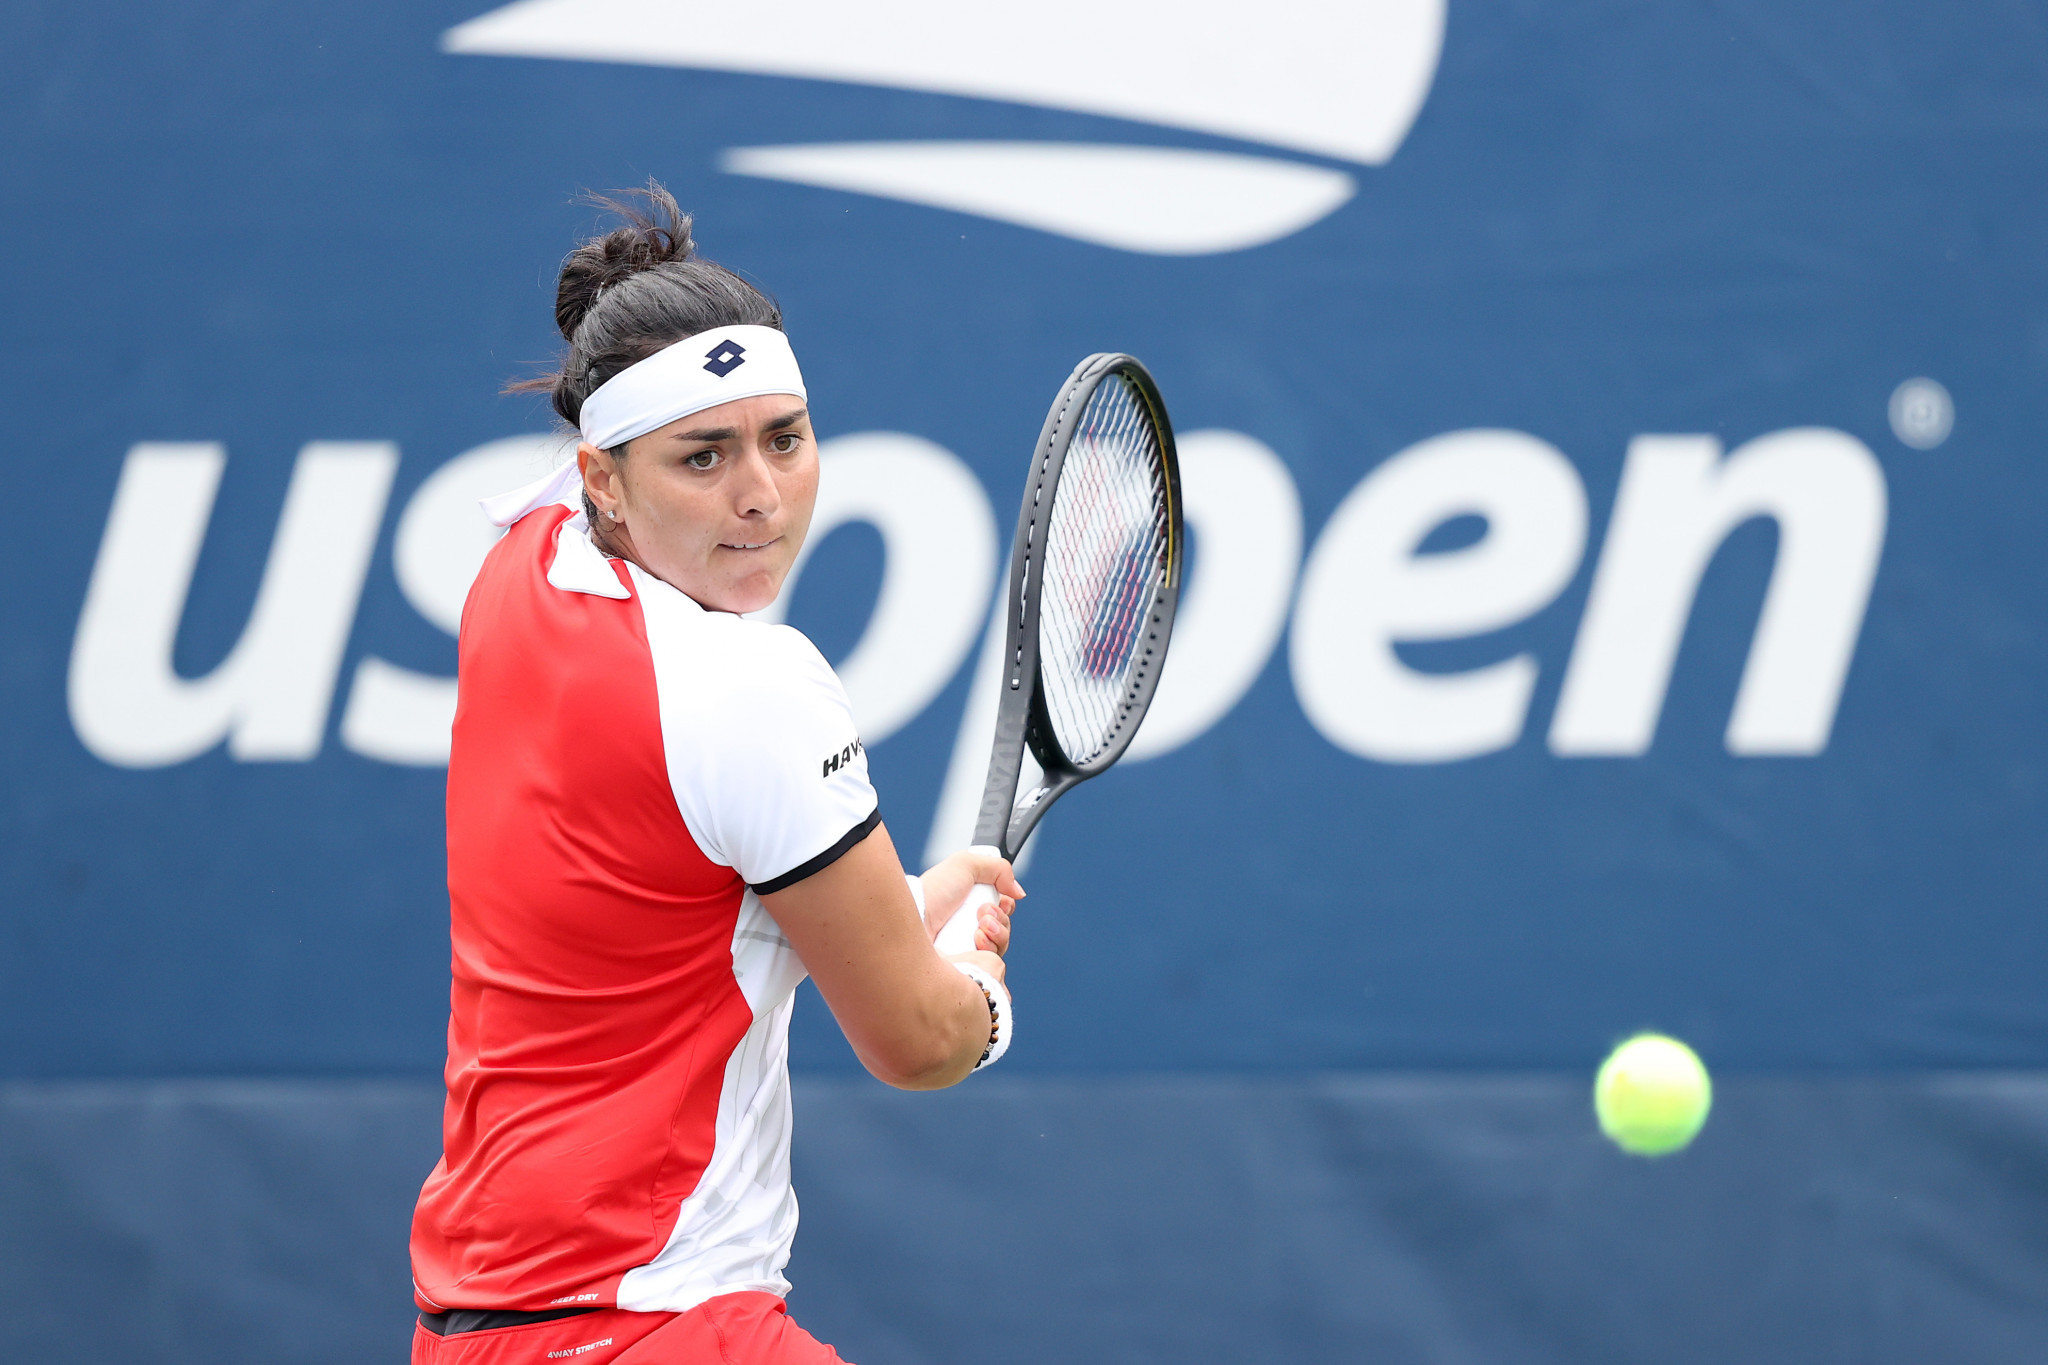 Ons Jabeur of Tunisia dropped just one game as she reached round three of the US Open in dominant fashion ©Getty Images